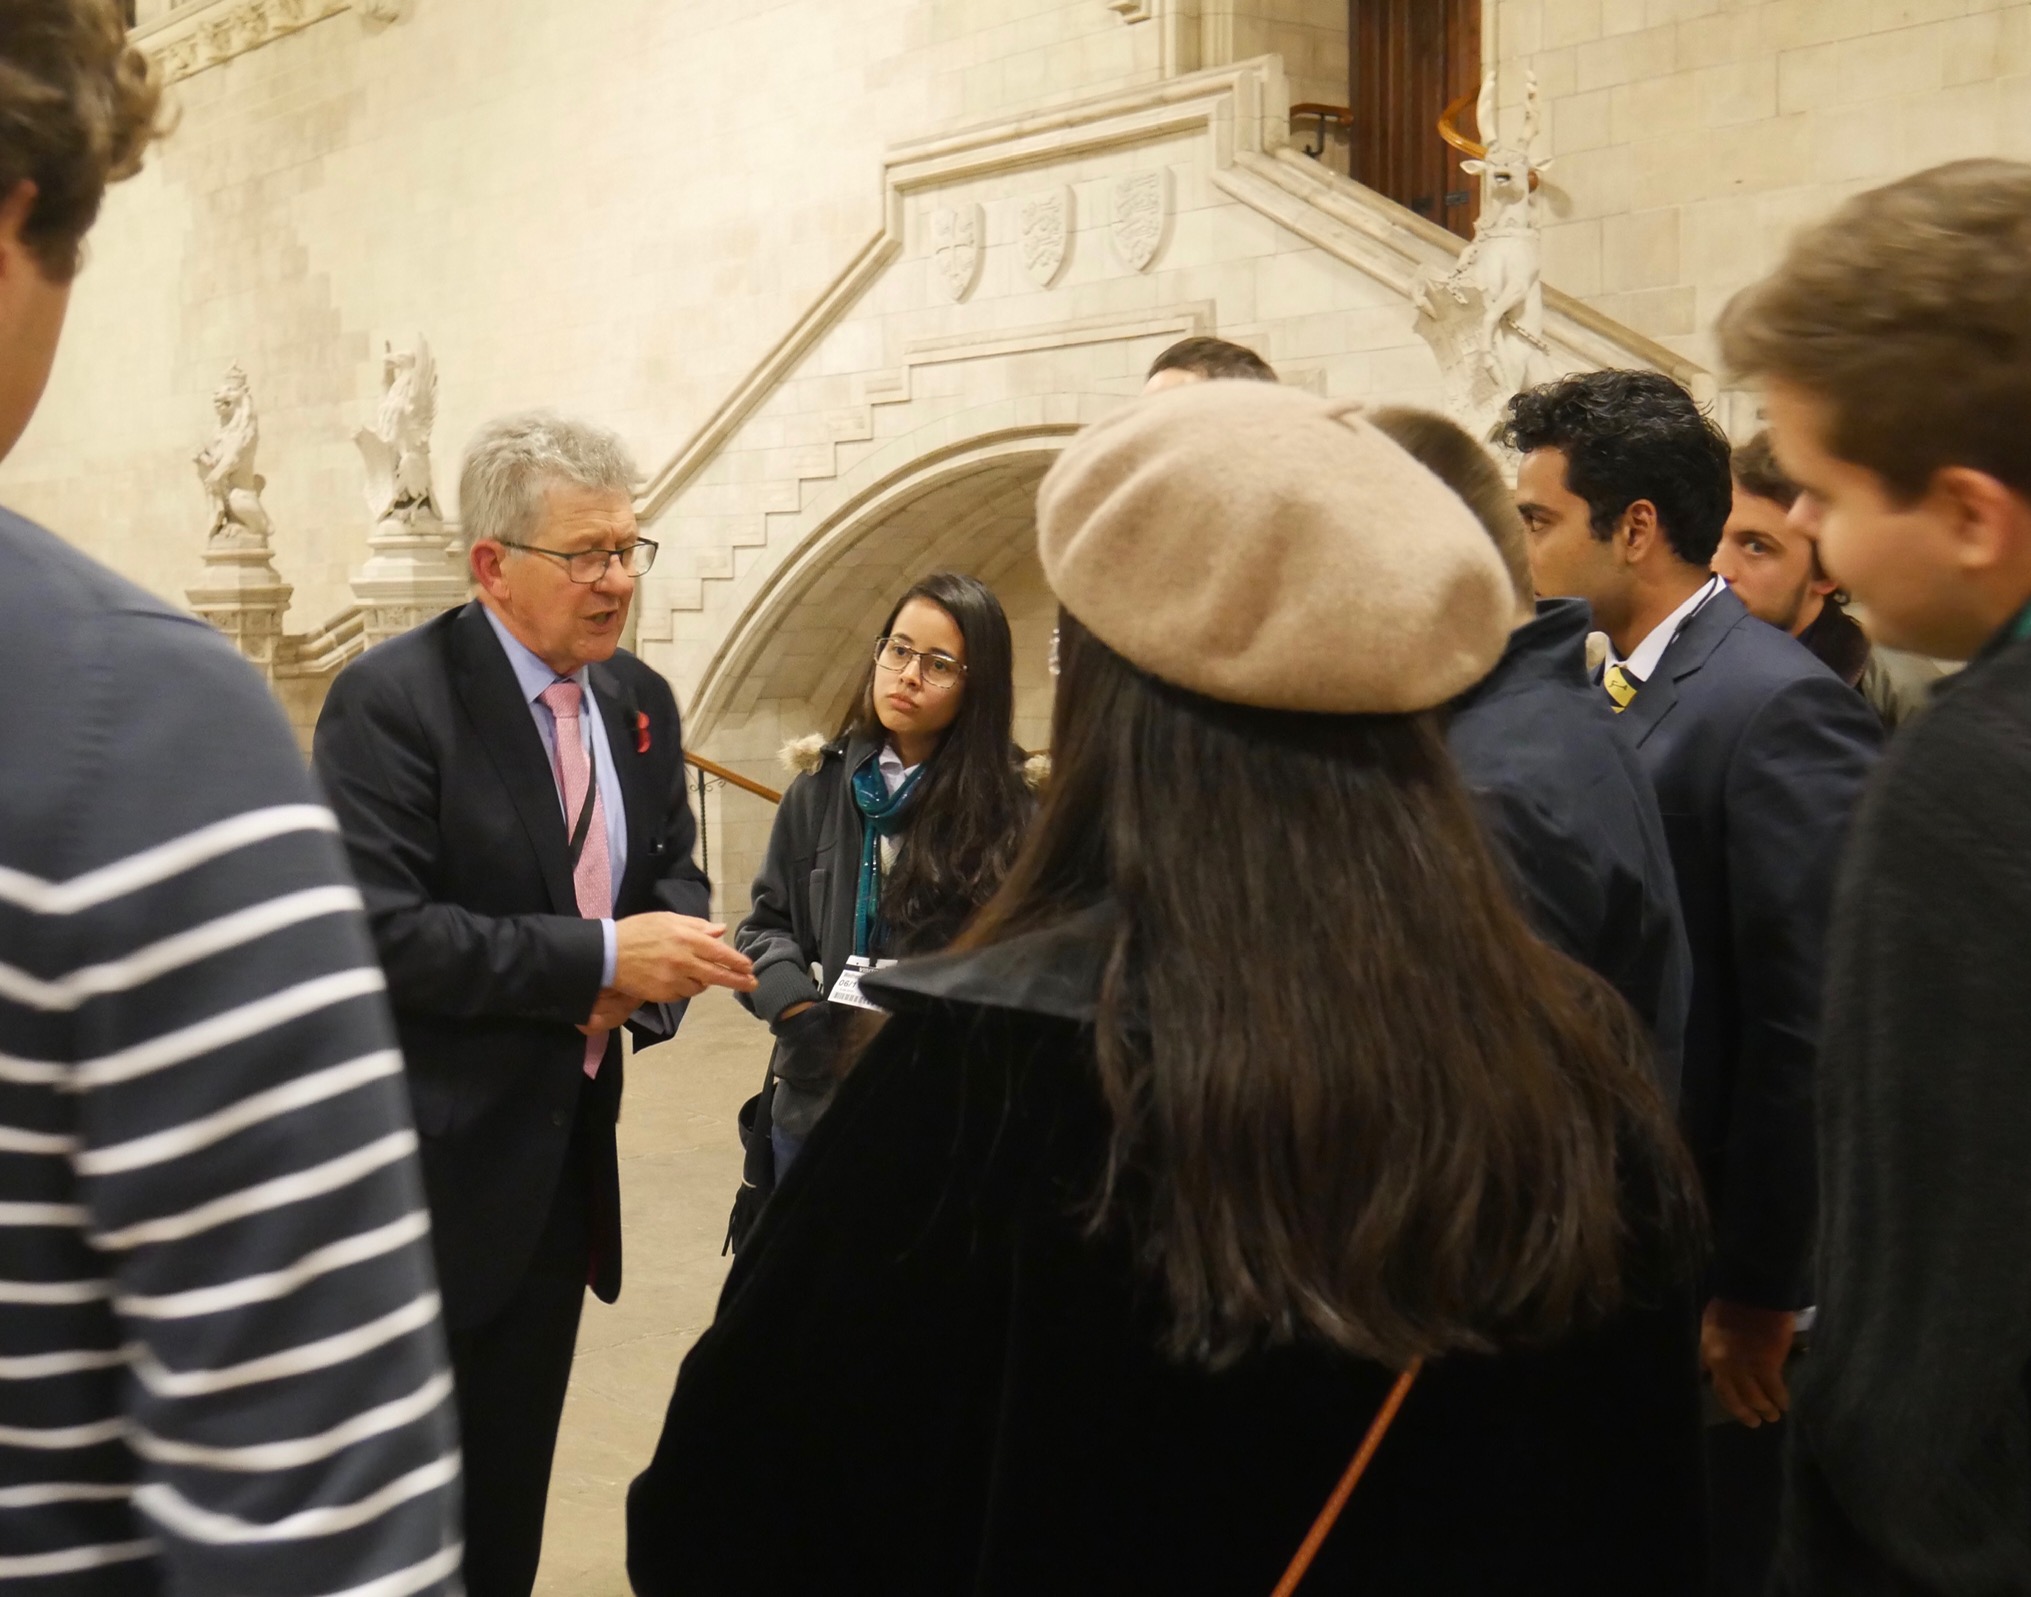 Lord Foster shares insights into the Palace of Westminster during a tour with guests